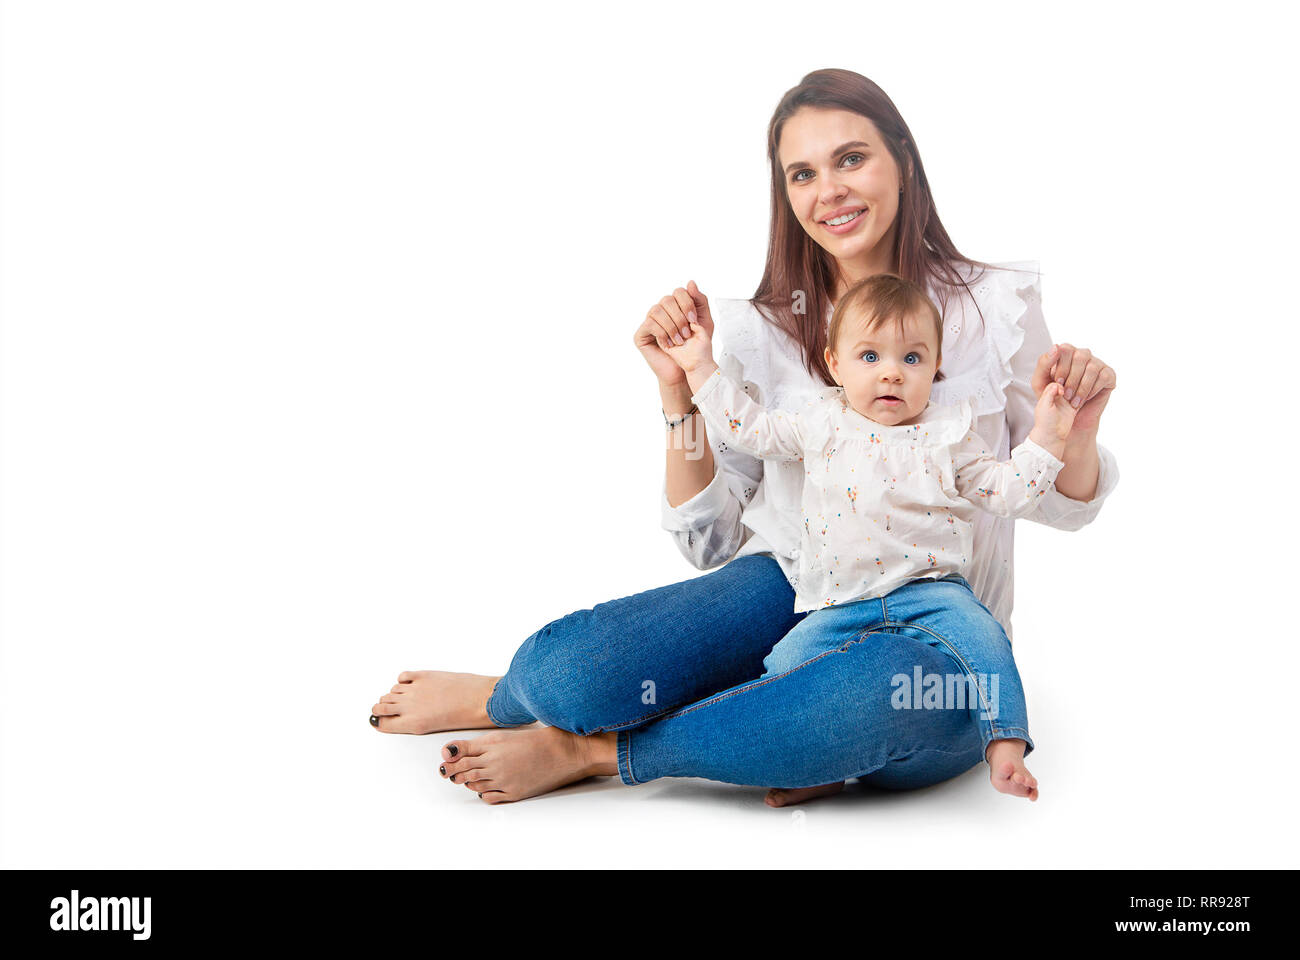 Loving mother and her baby girl isolated on white background Stock Photo